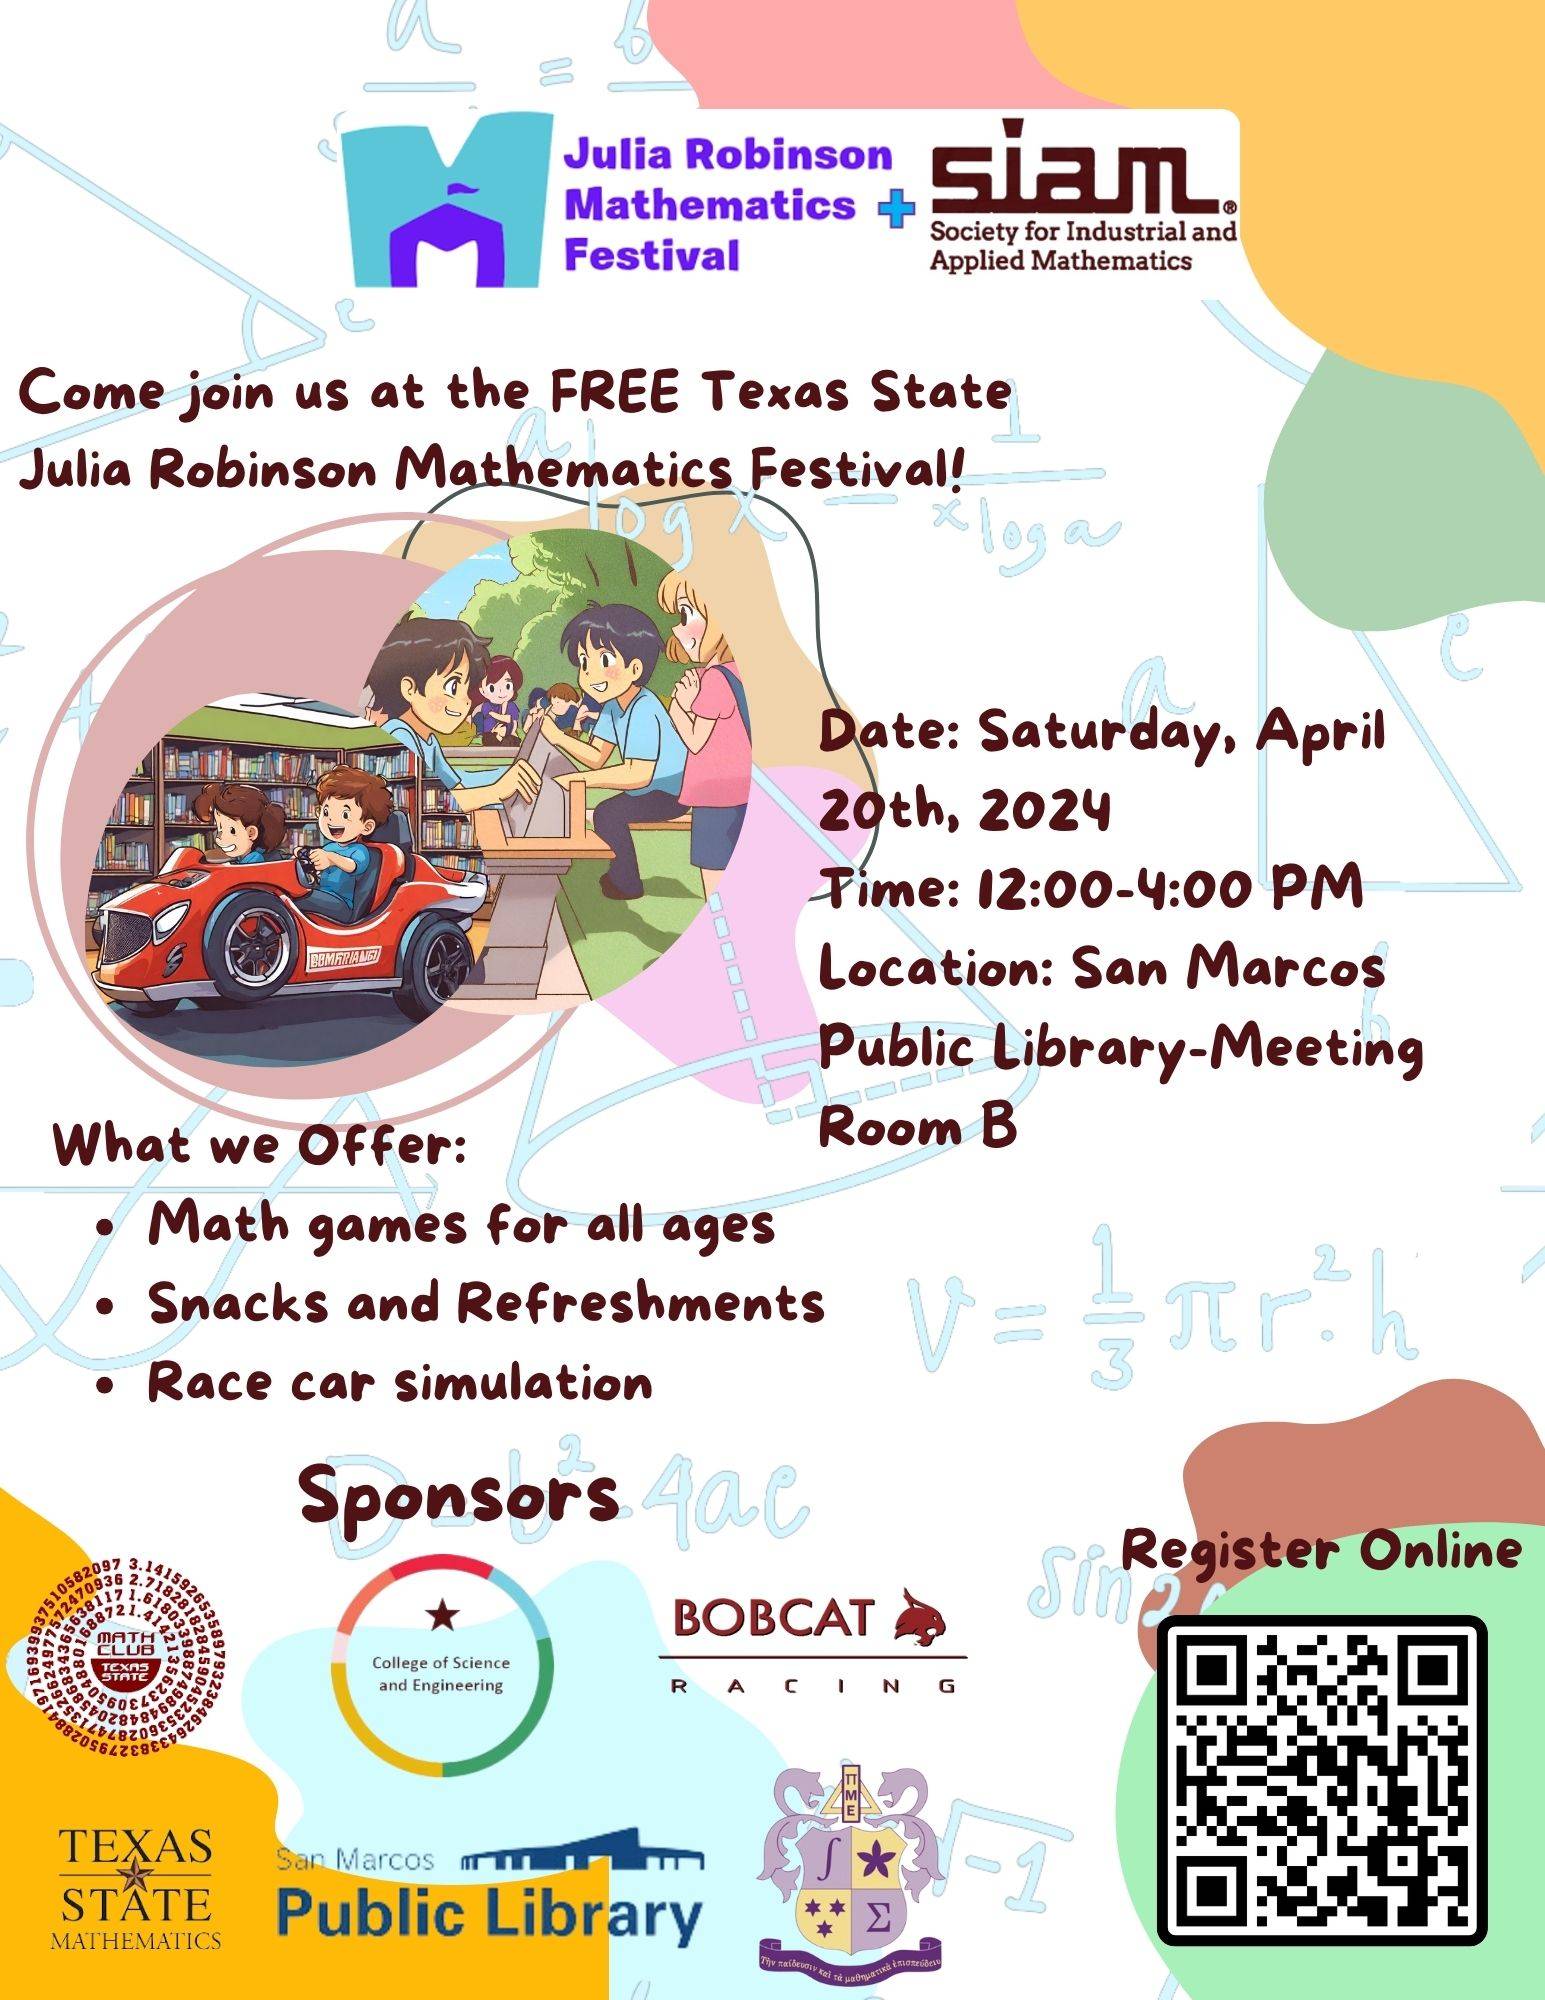 COME JOIN US AT THE FREE TEXAS STATE JULIA ROBINSON MATHEMATICS FESTIVAL!